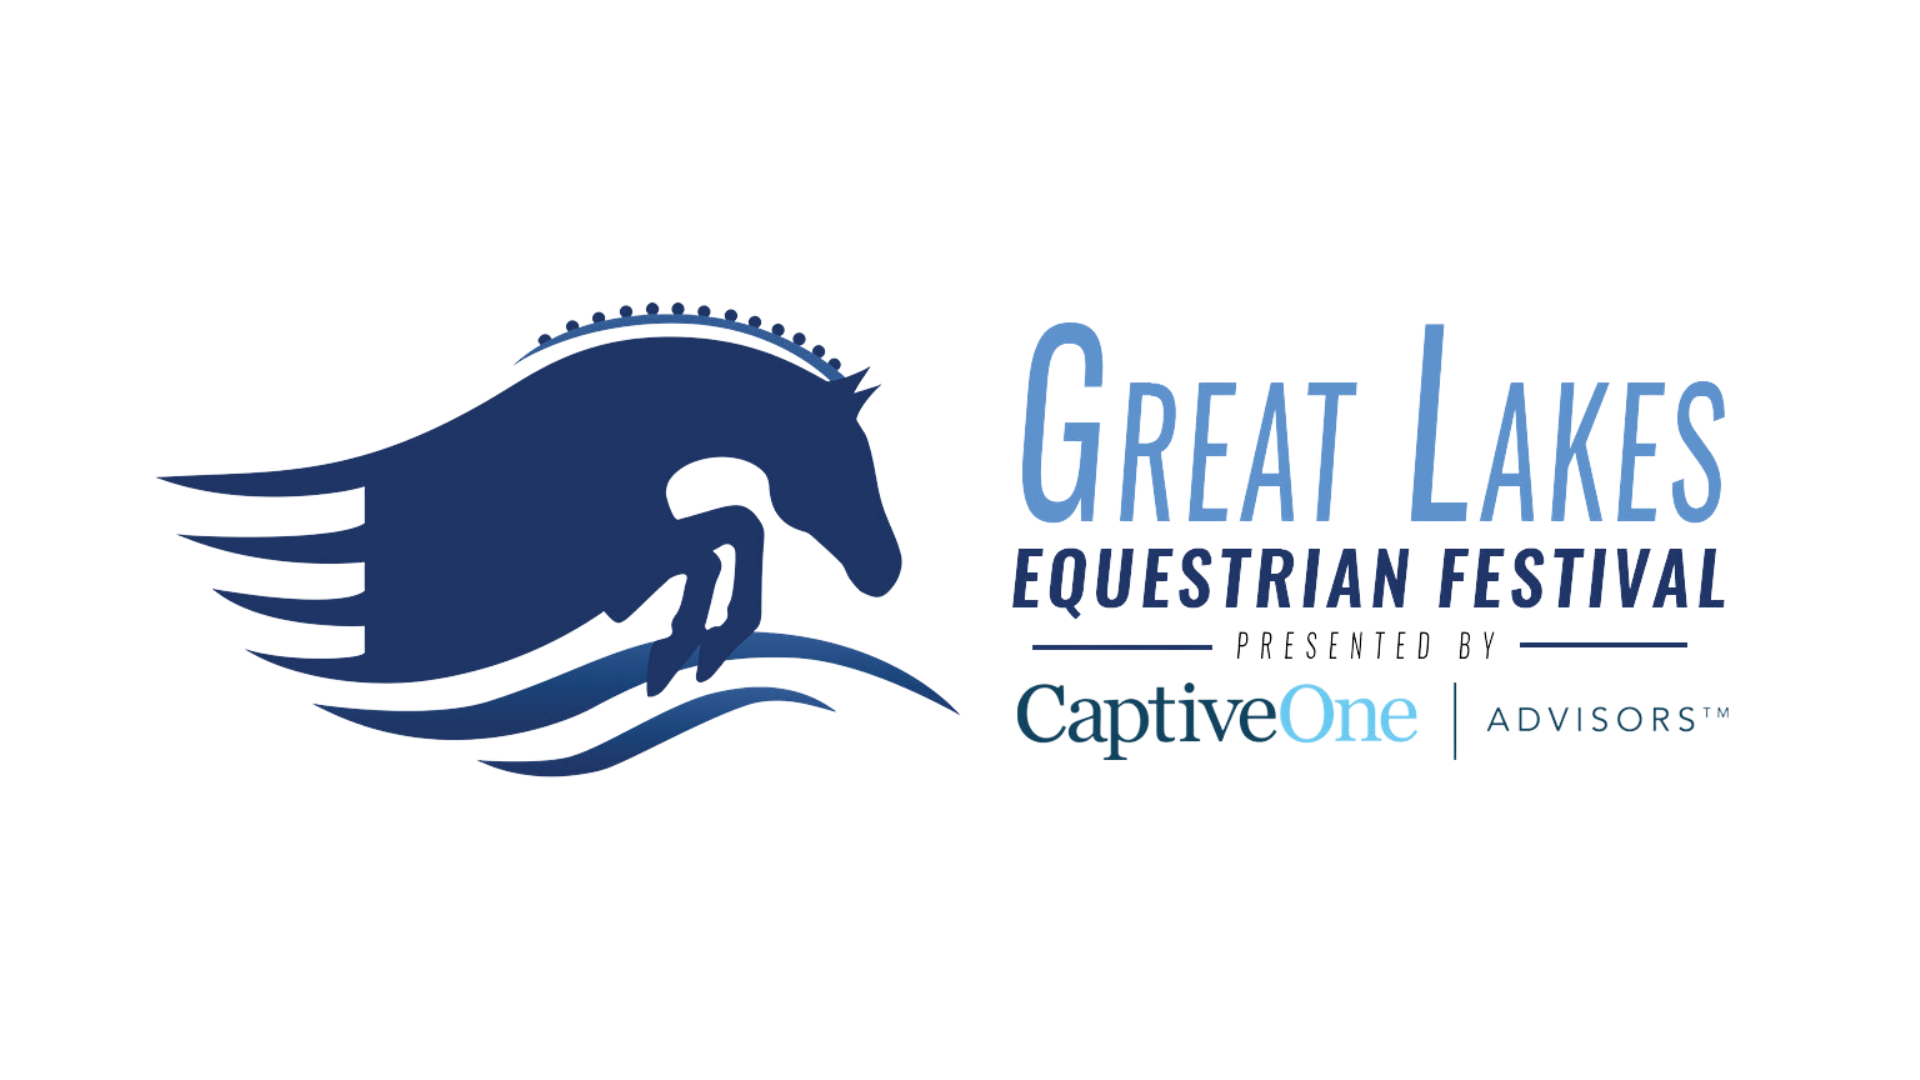 EA Limited Inc. proudly sold at the Great Lakes Equestrian Festival in Traverse City, MI.